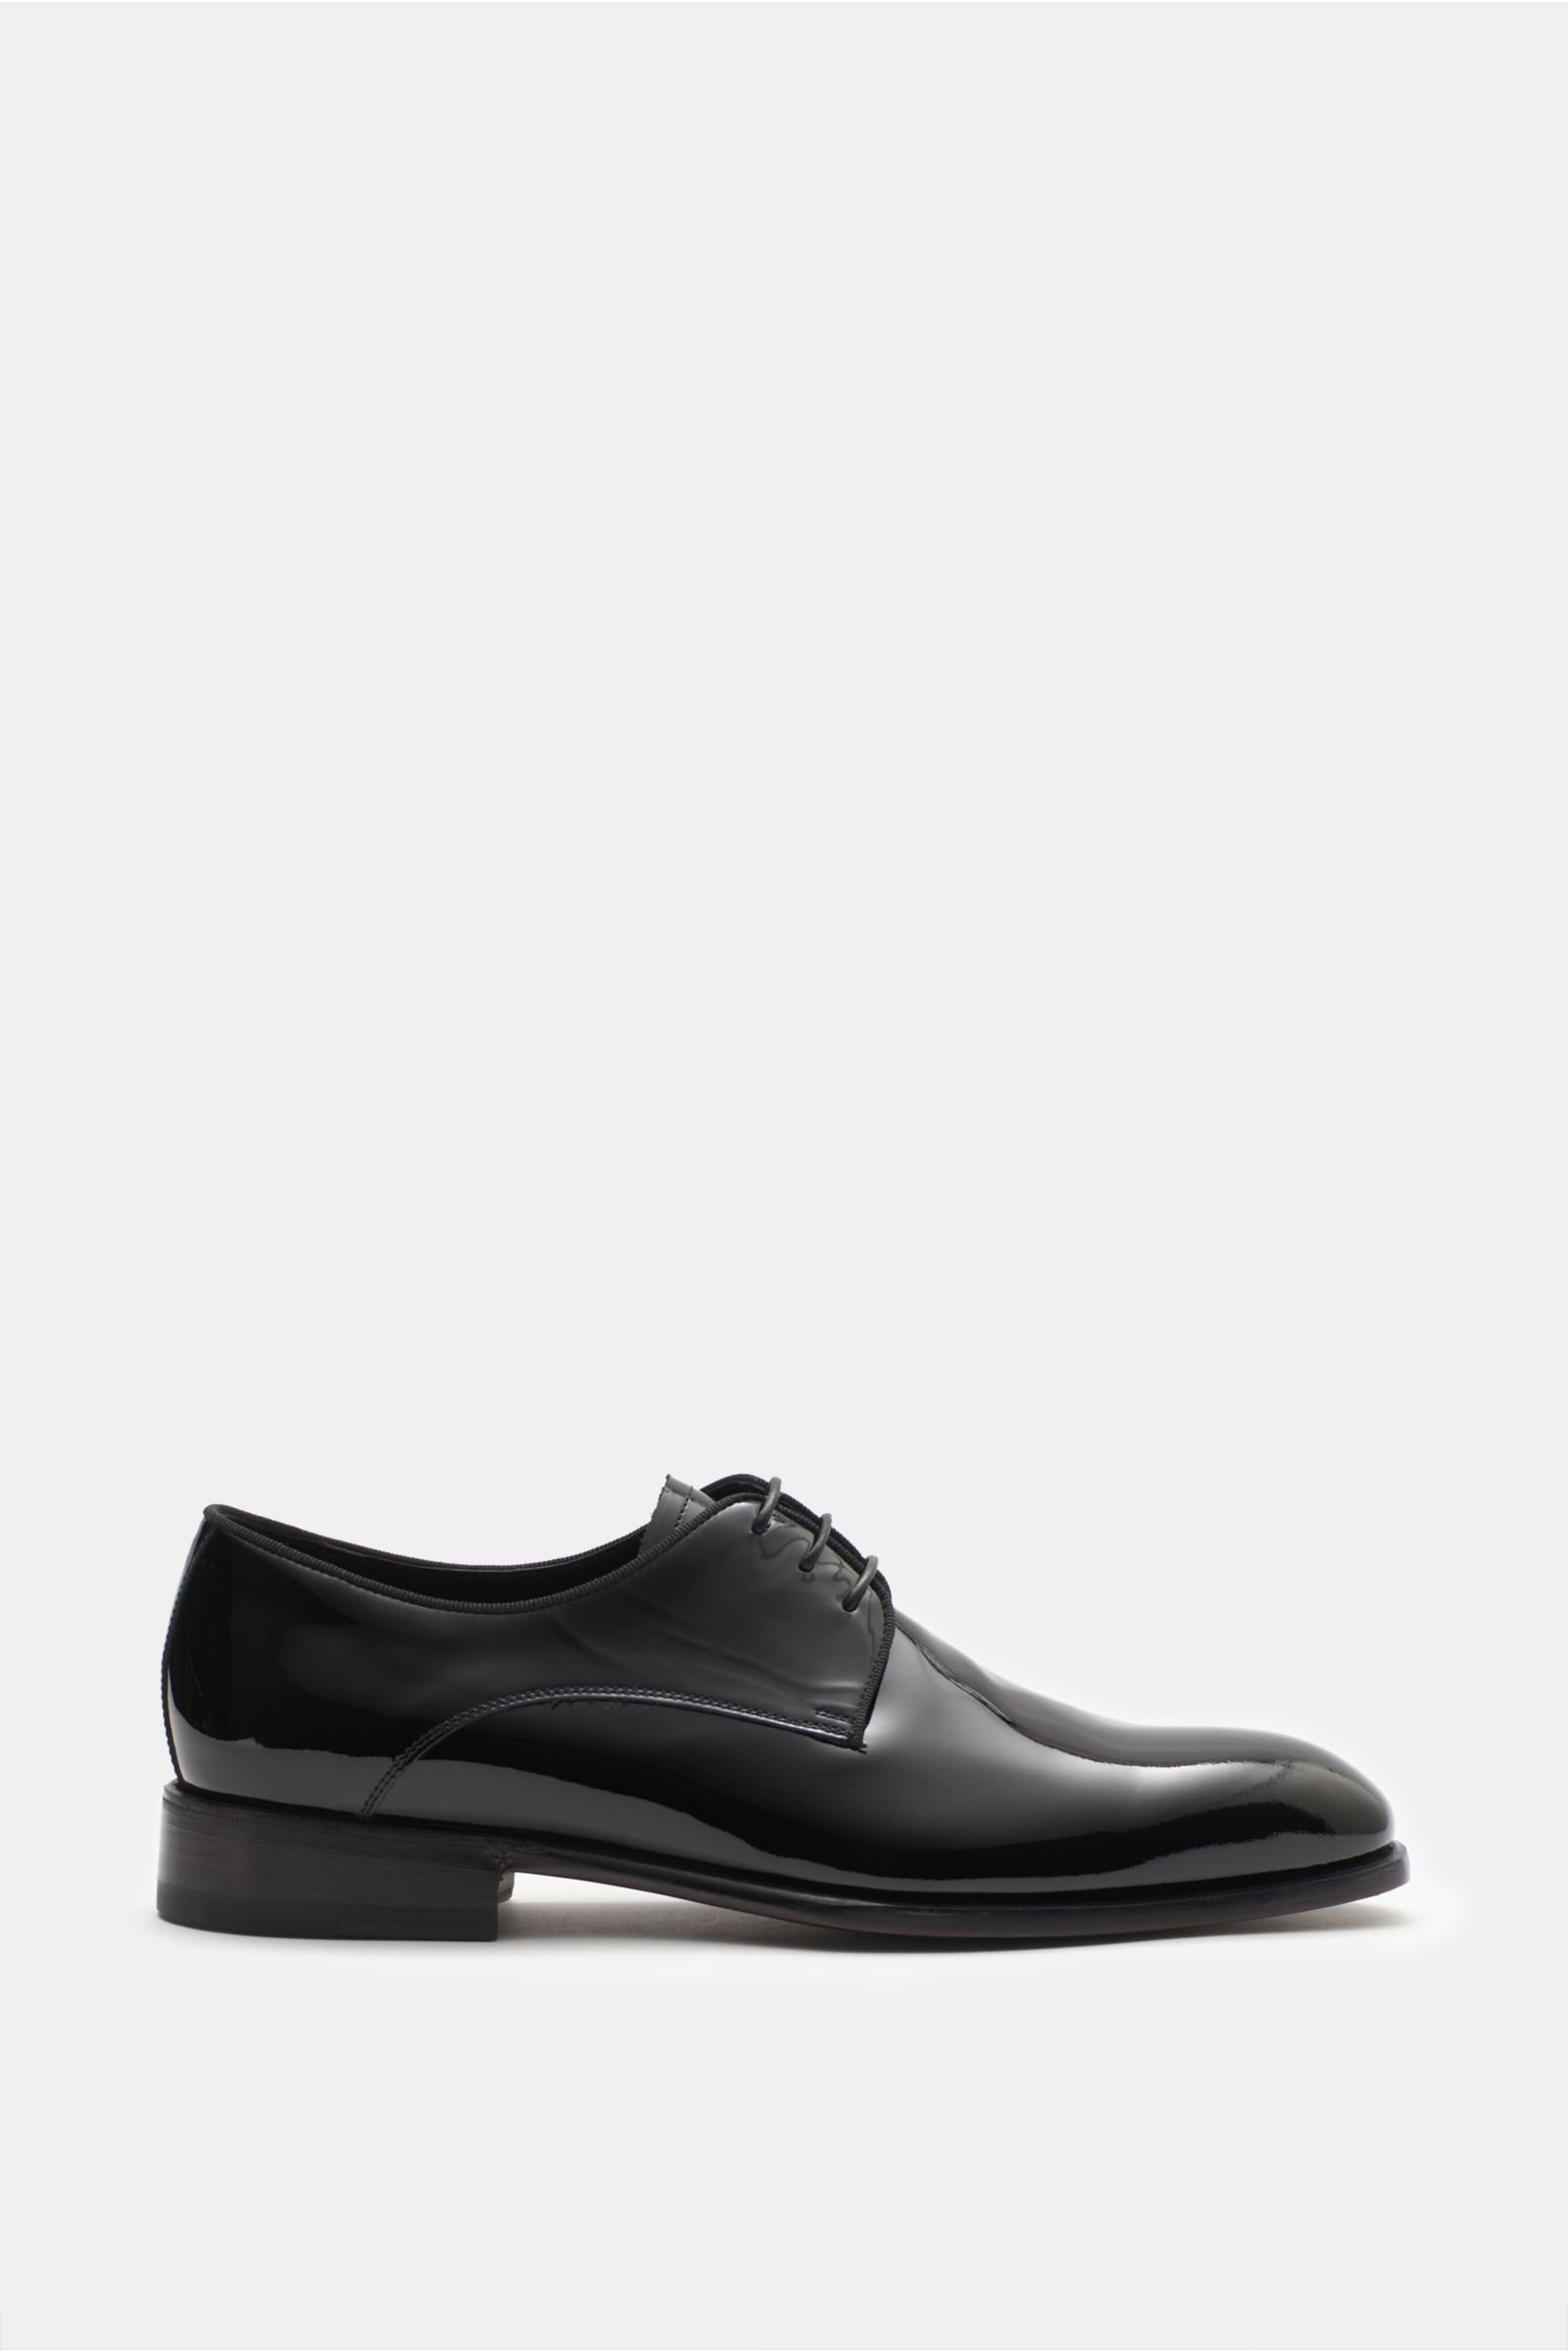 Patent leather Derby shoes black